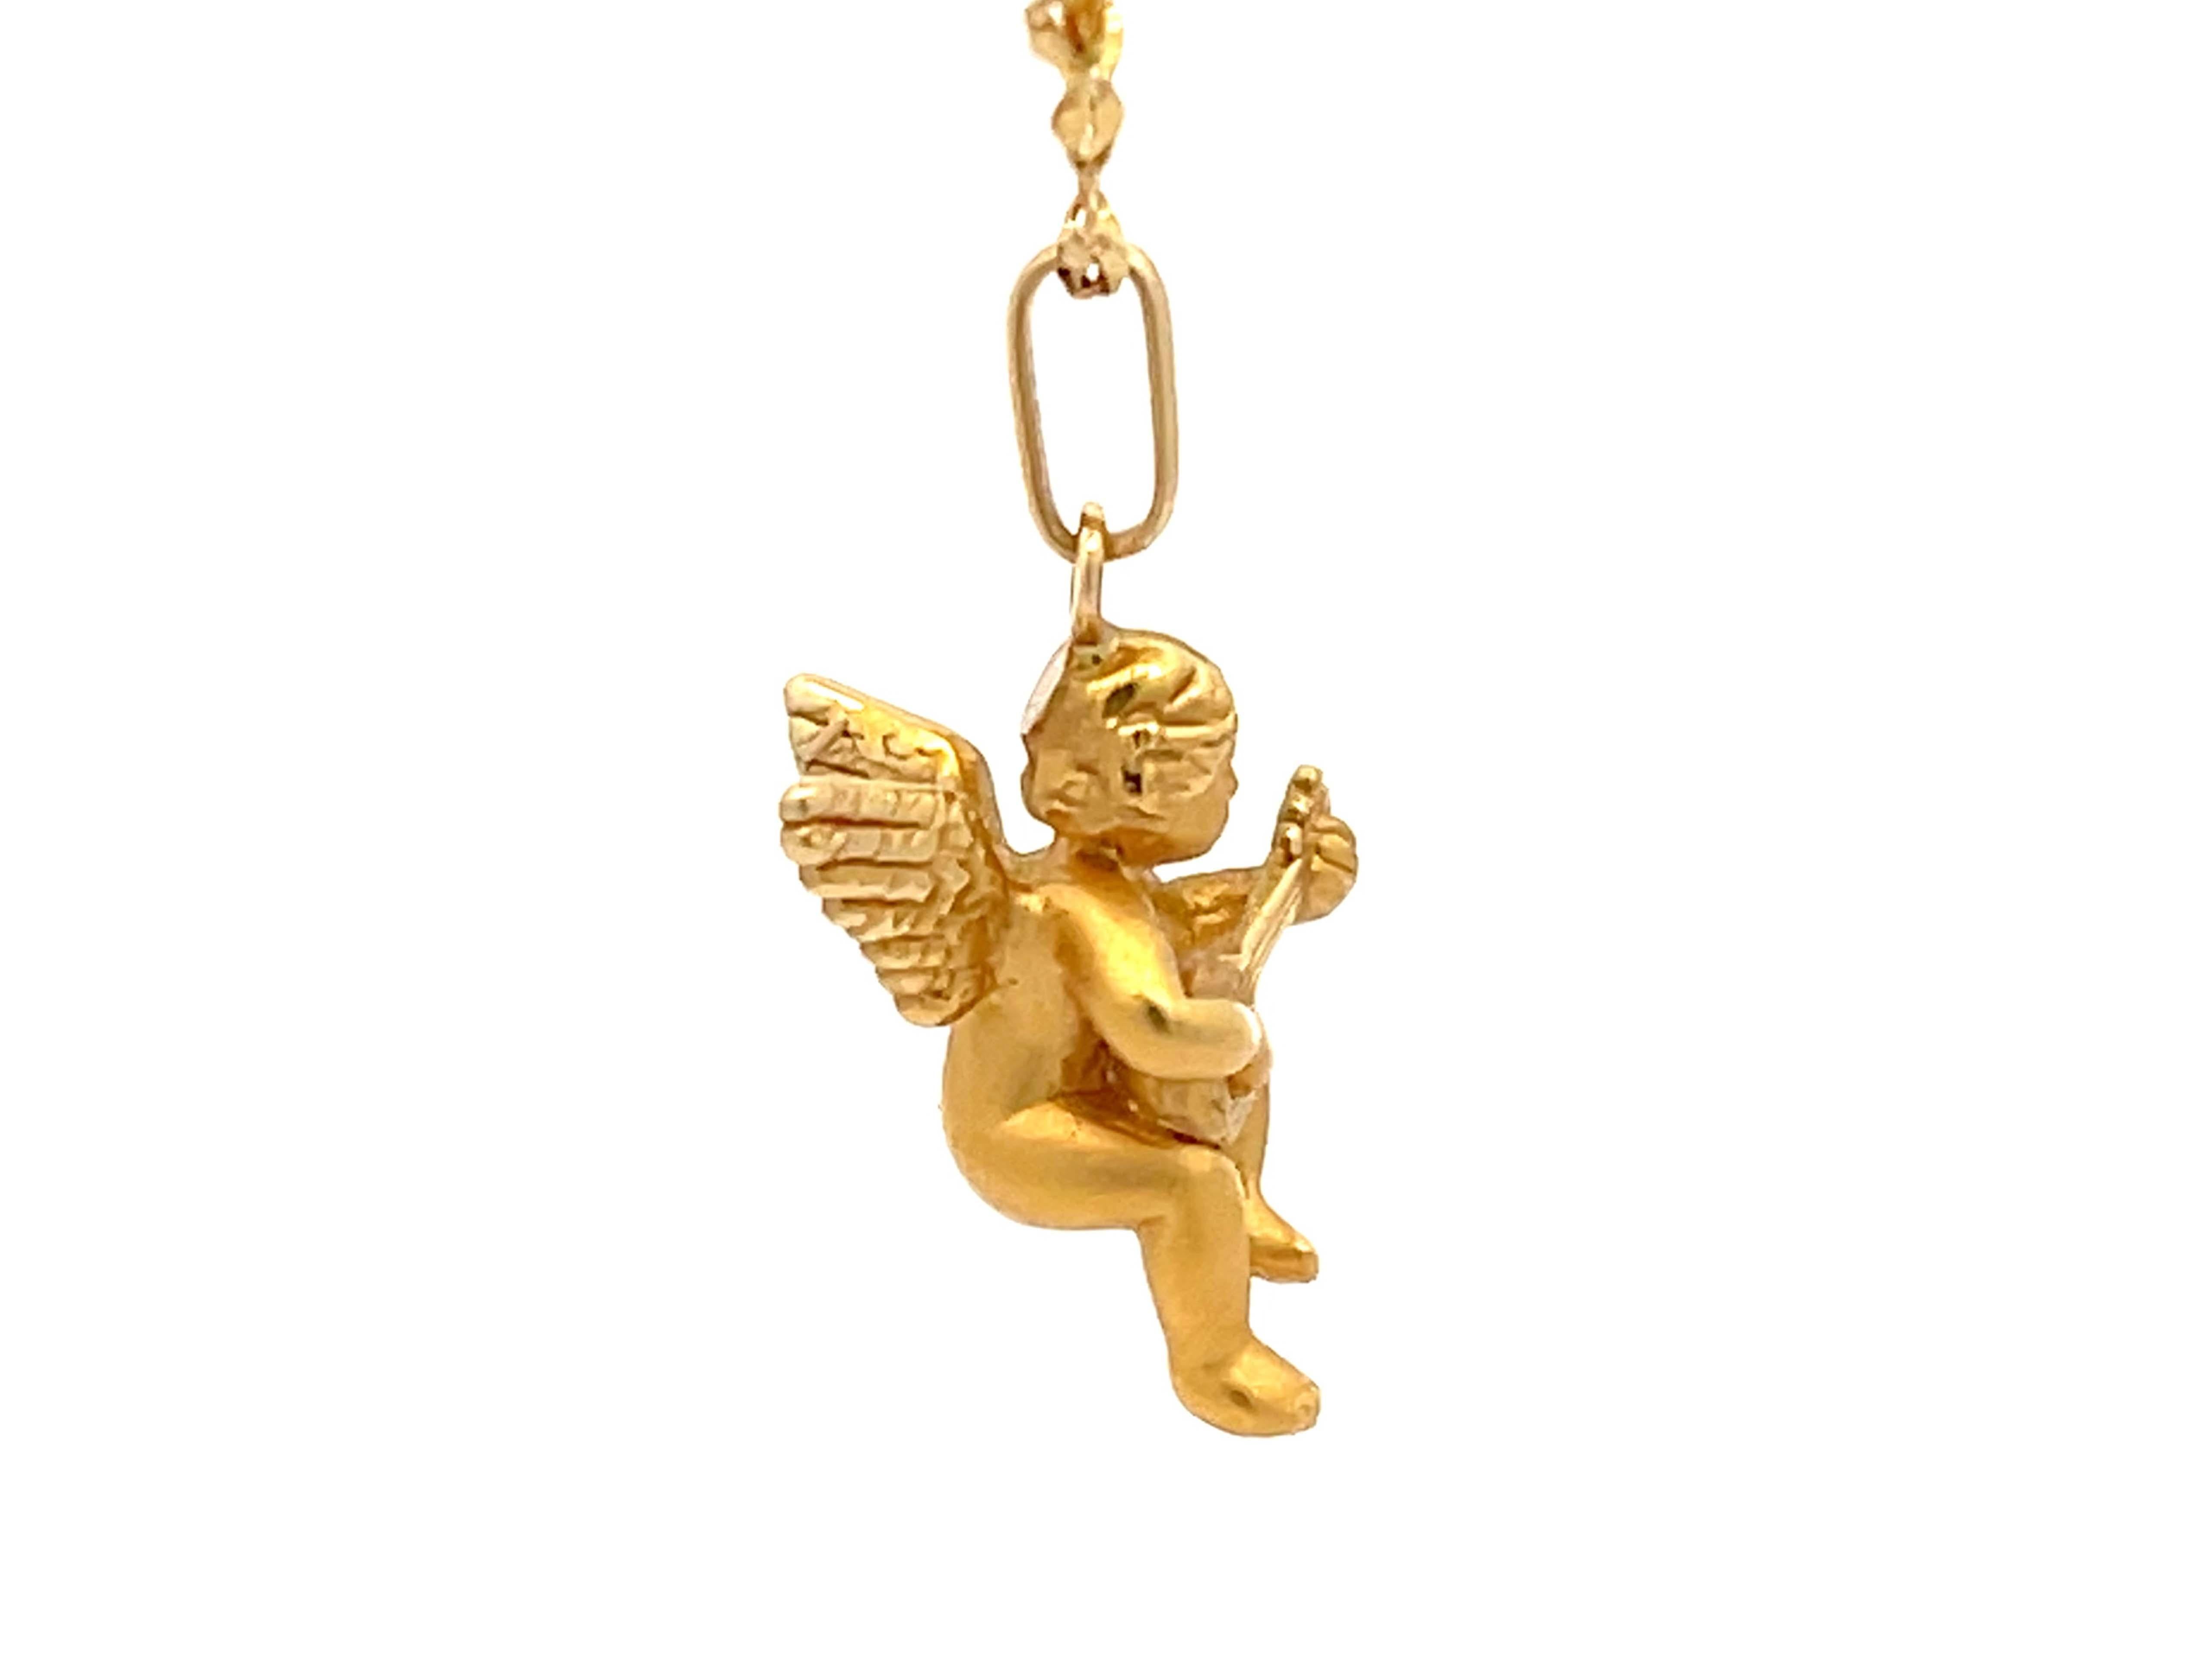 French Designer Cupid Mandolin Necklace in 18k Yellow Gold In New Condition For Sale In Honolulu, HI